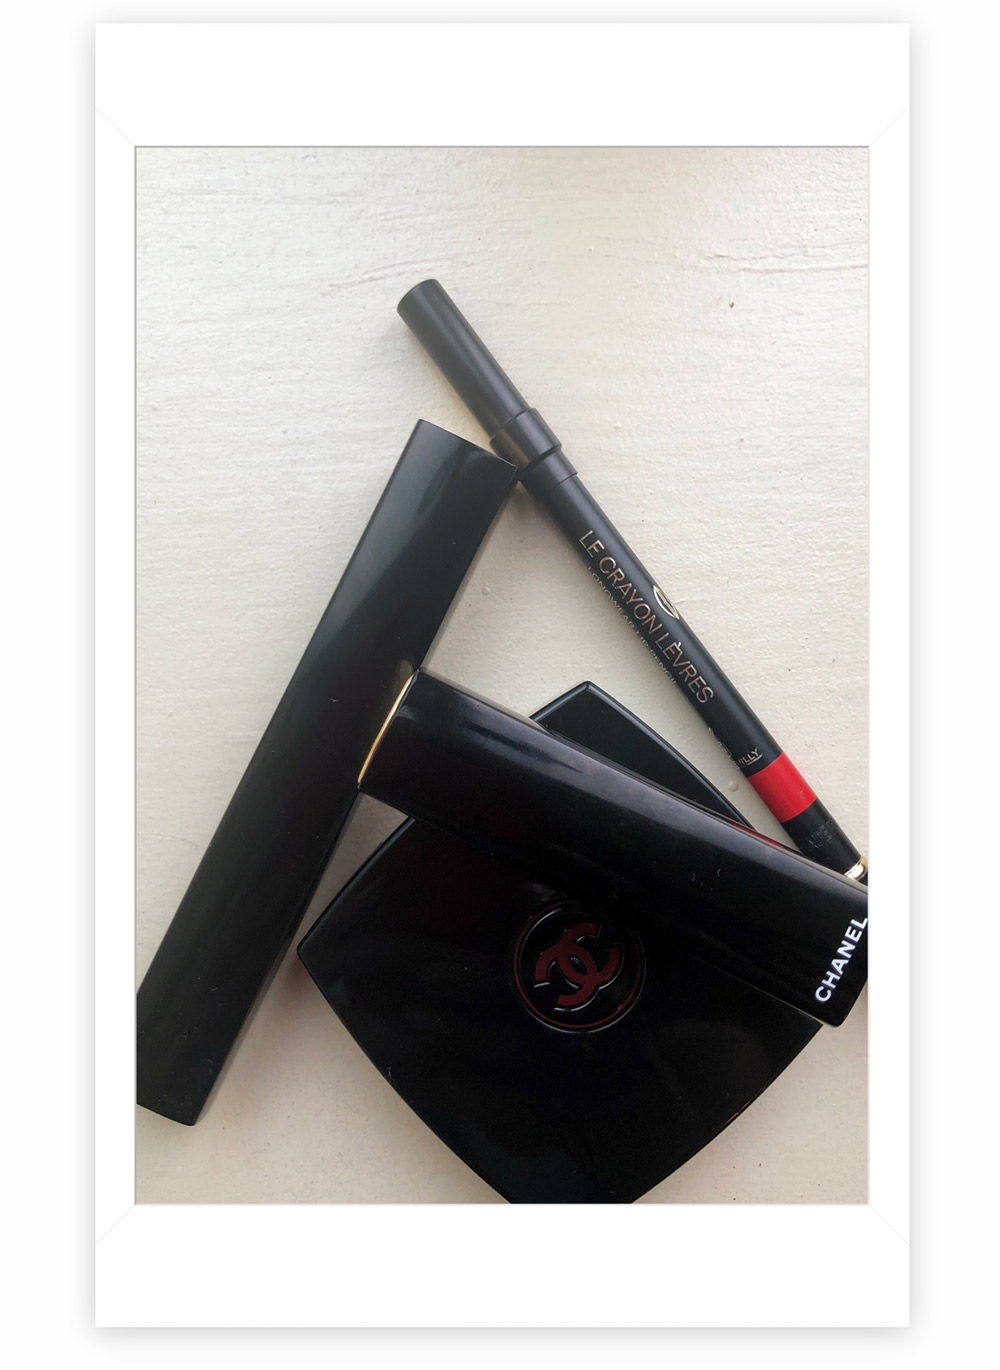 Red Kiss for Valentine's Day: The Lip Crayon « Jumbo » by Chanel - ZOE  Magazine